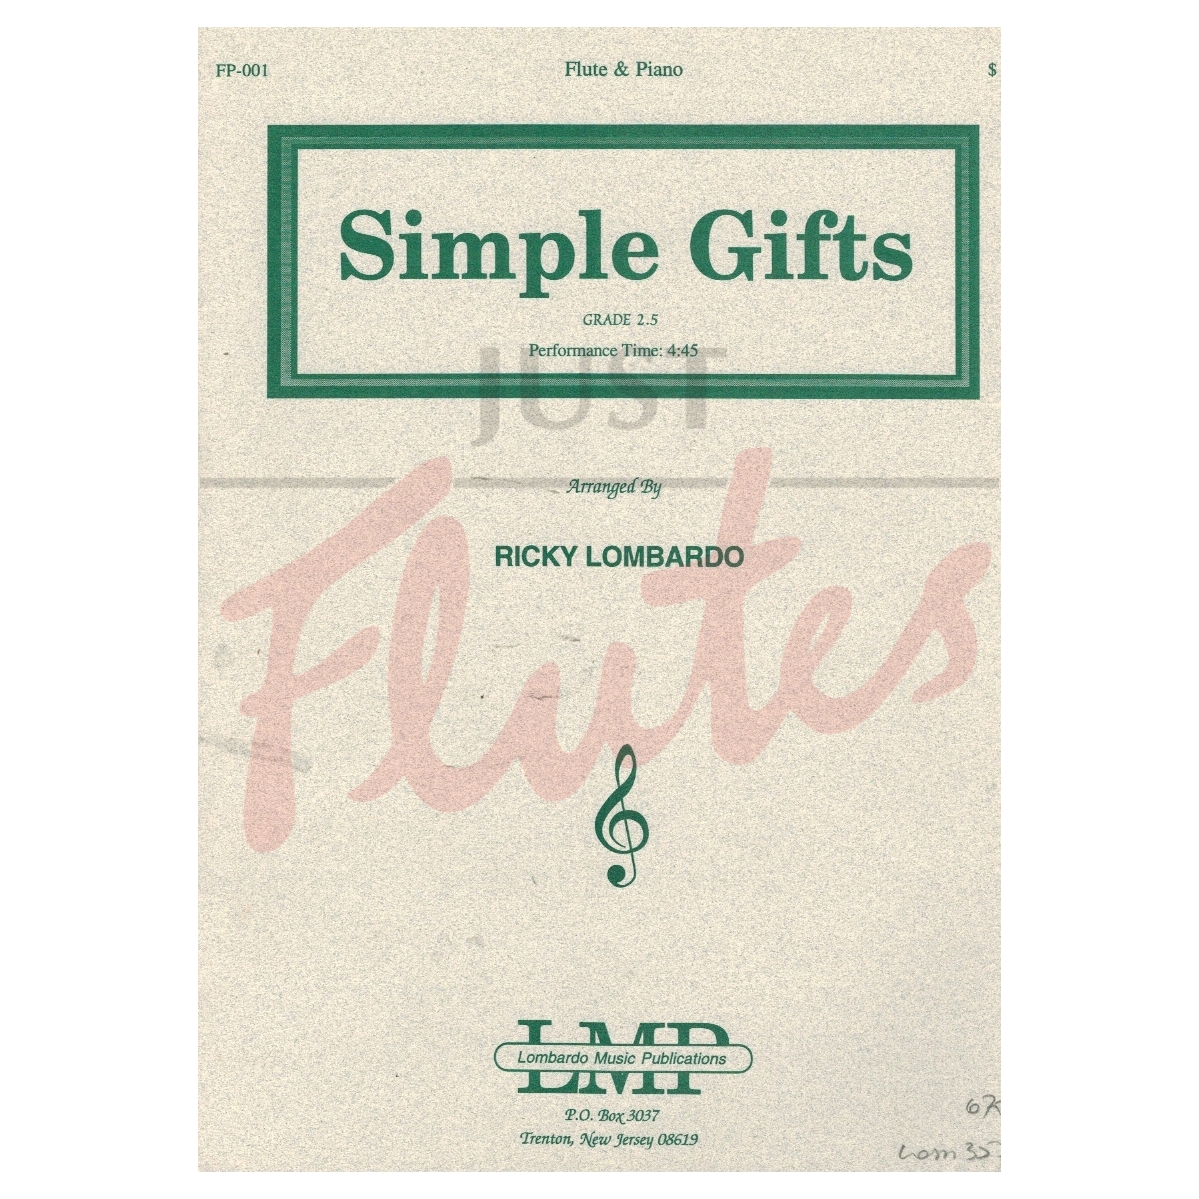 Simple Gifts arranged for Flute and Piano